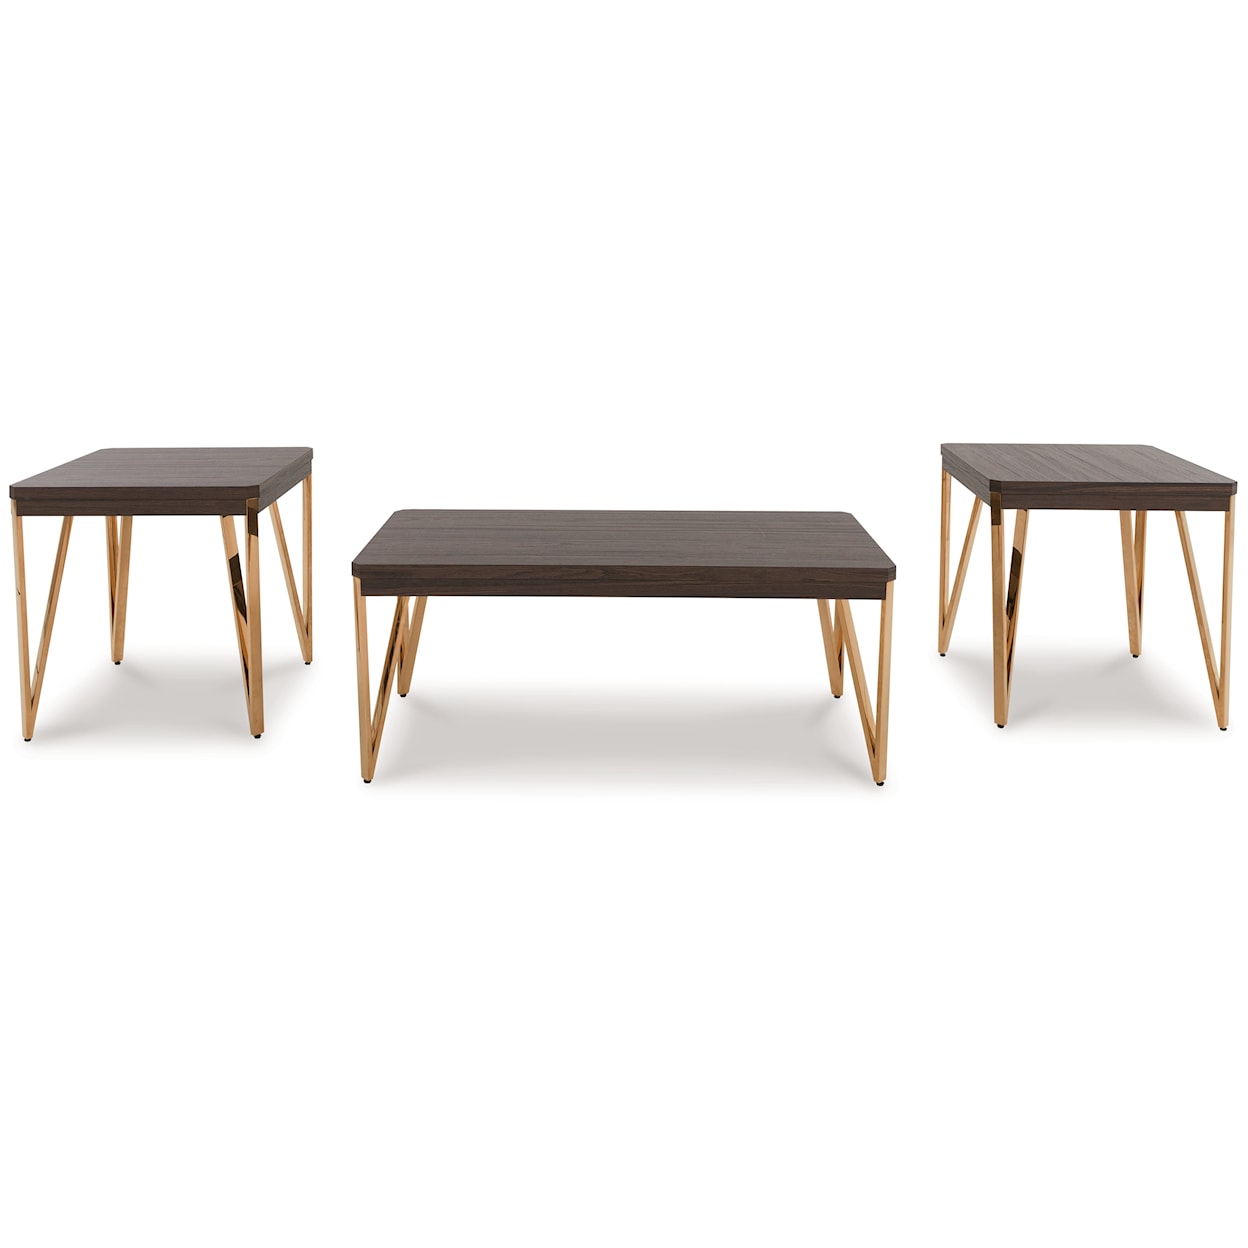 Benchcraft Bandyn Occasional Table Set